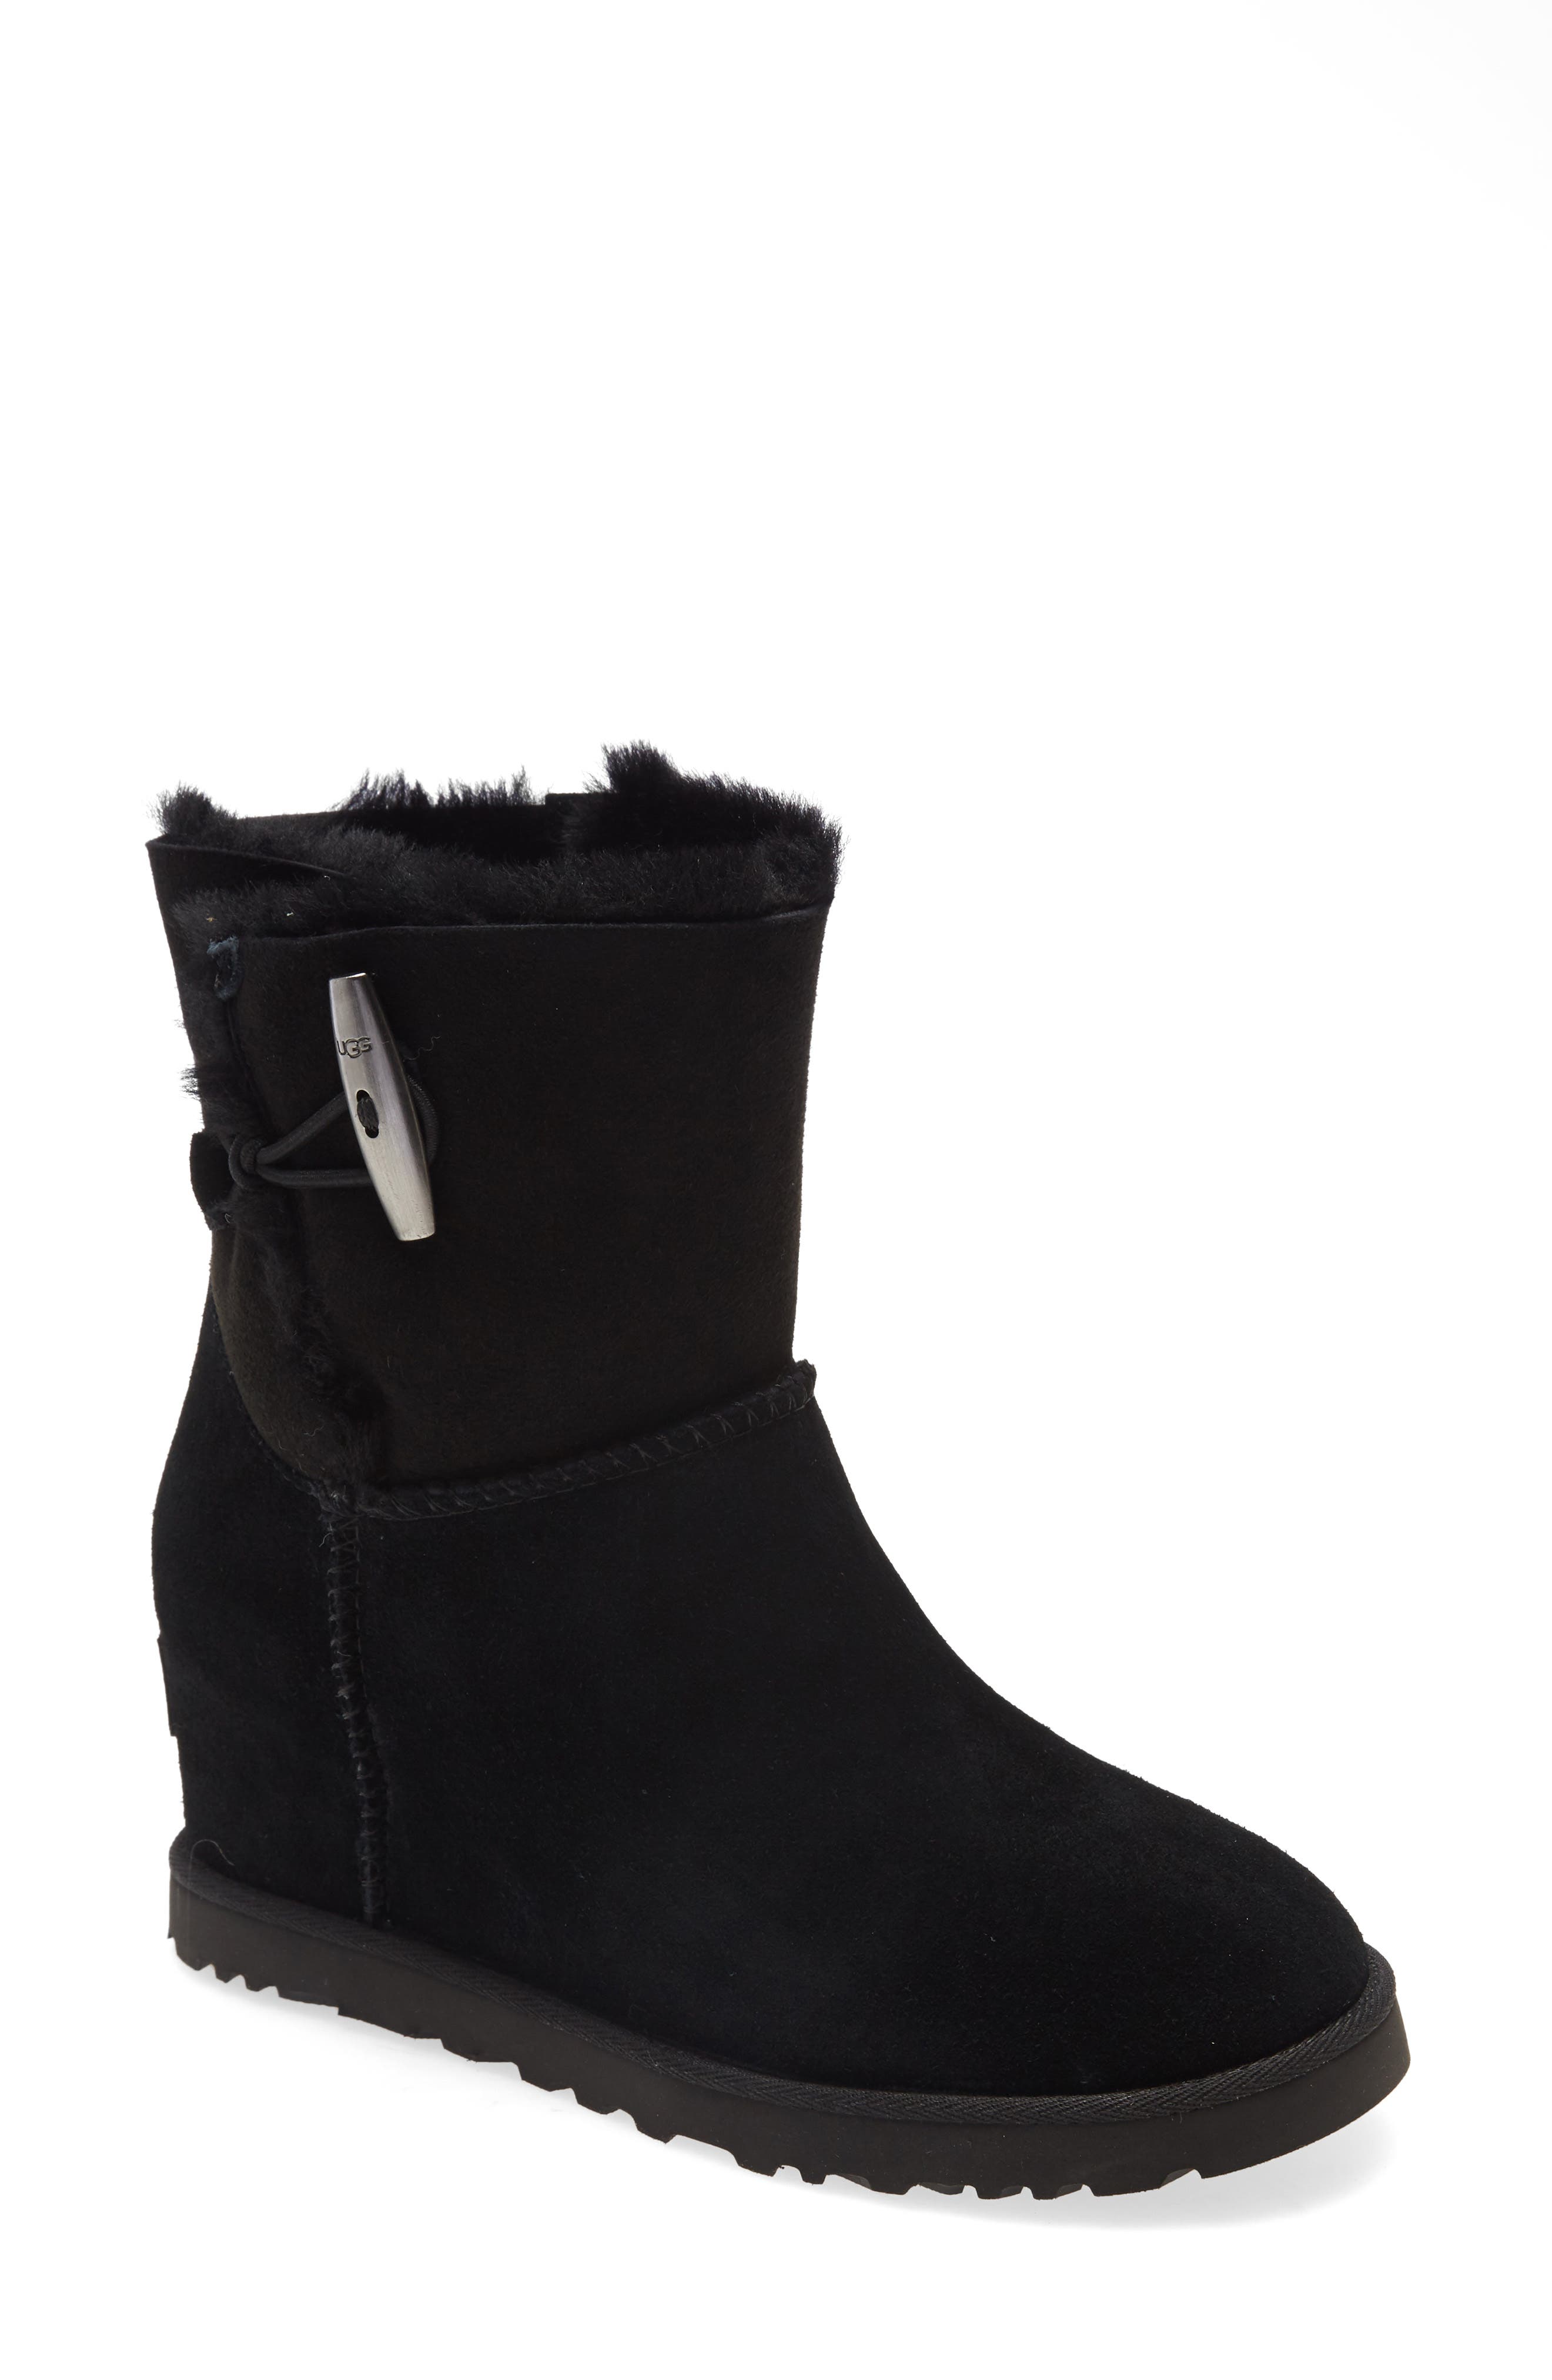 nordstrom boots canada